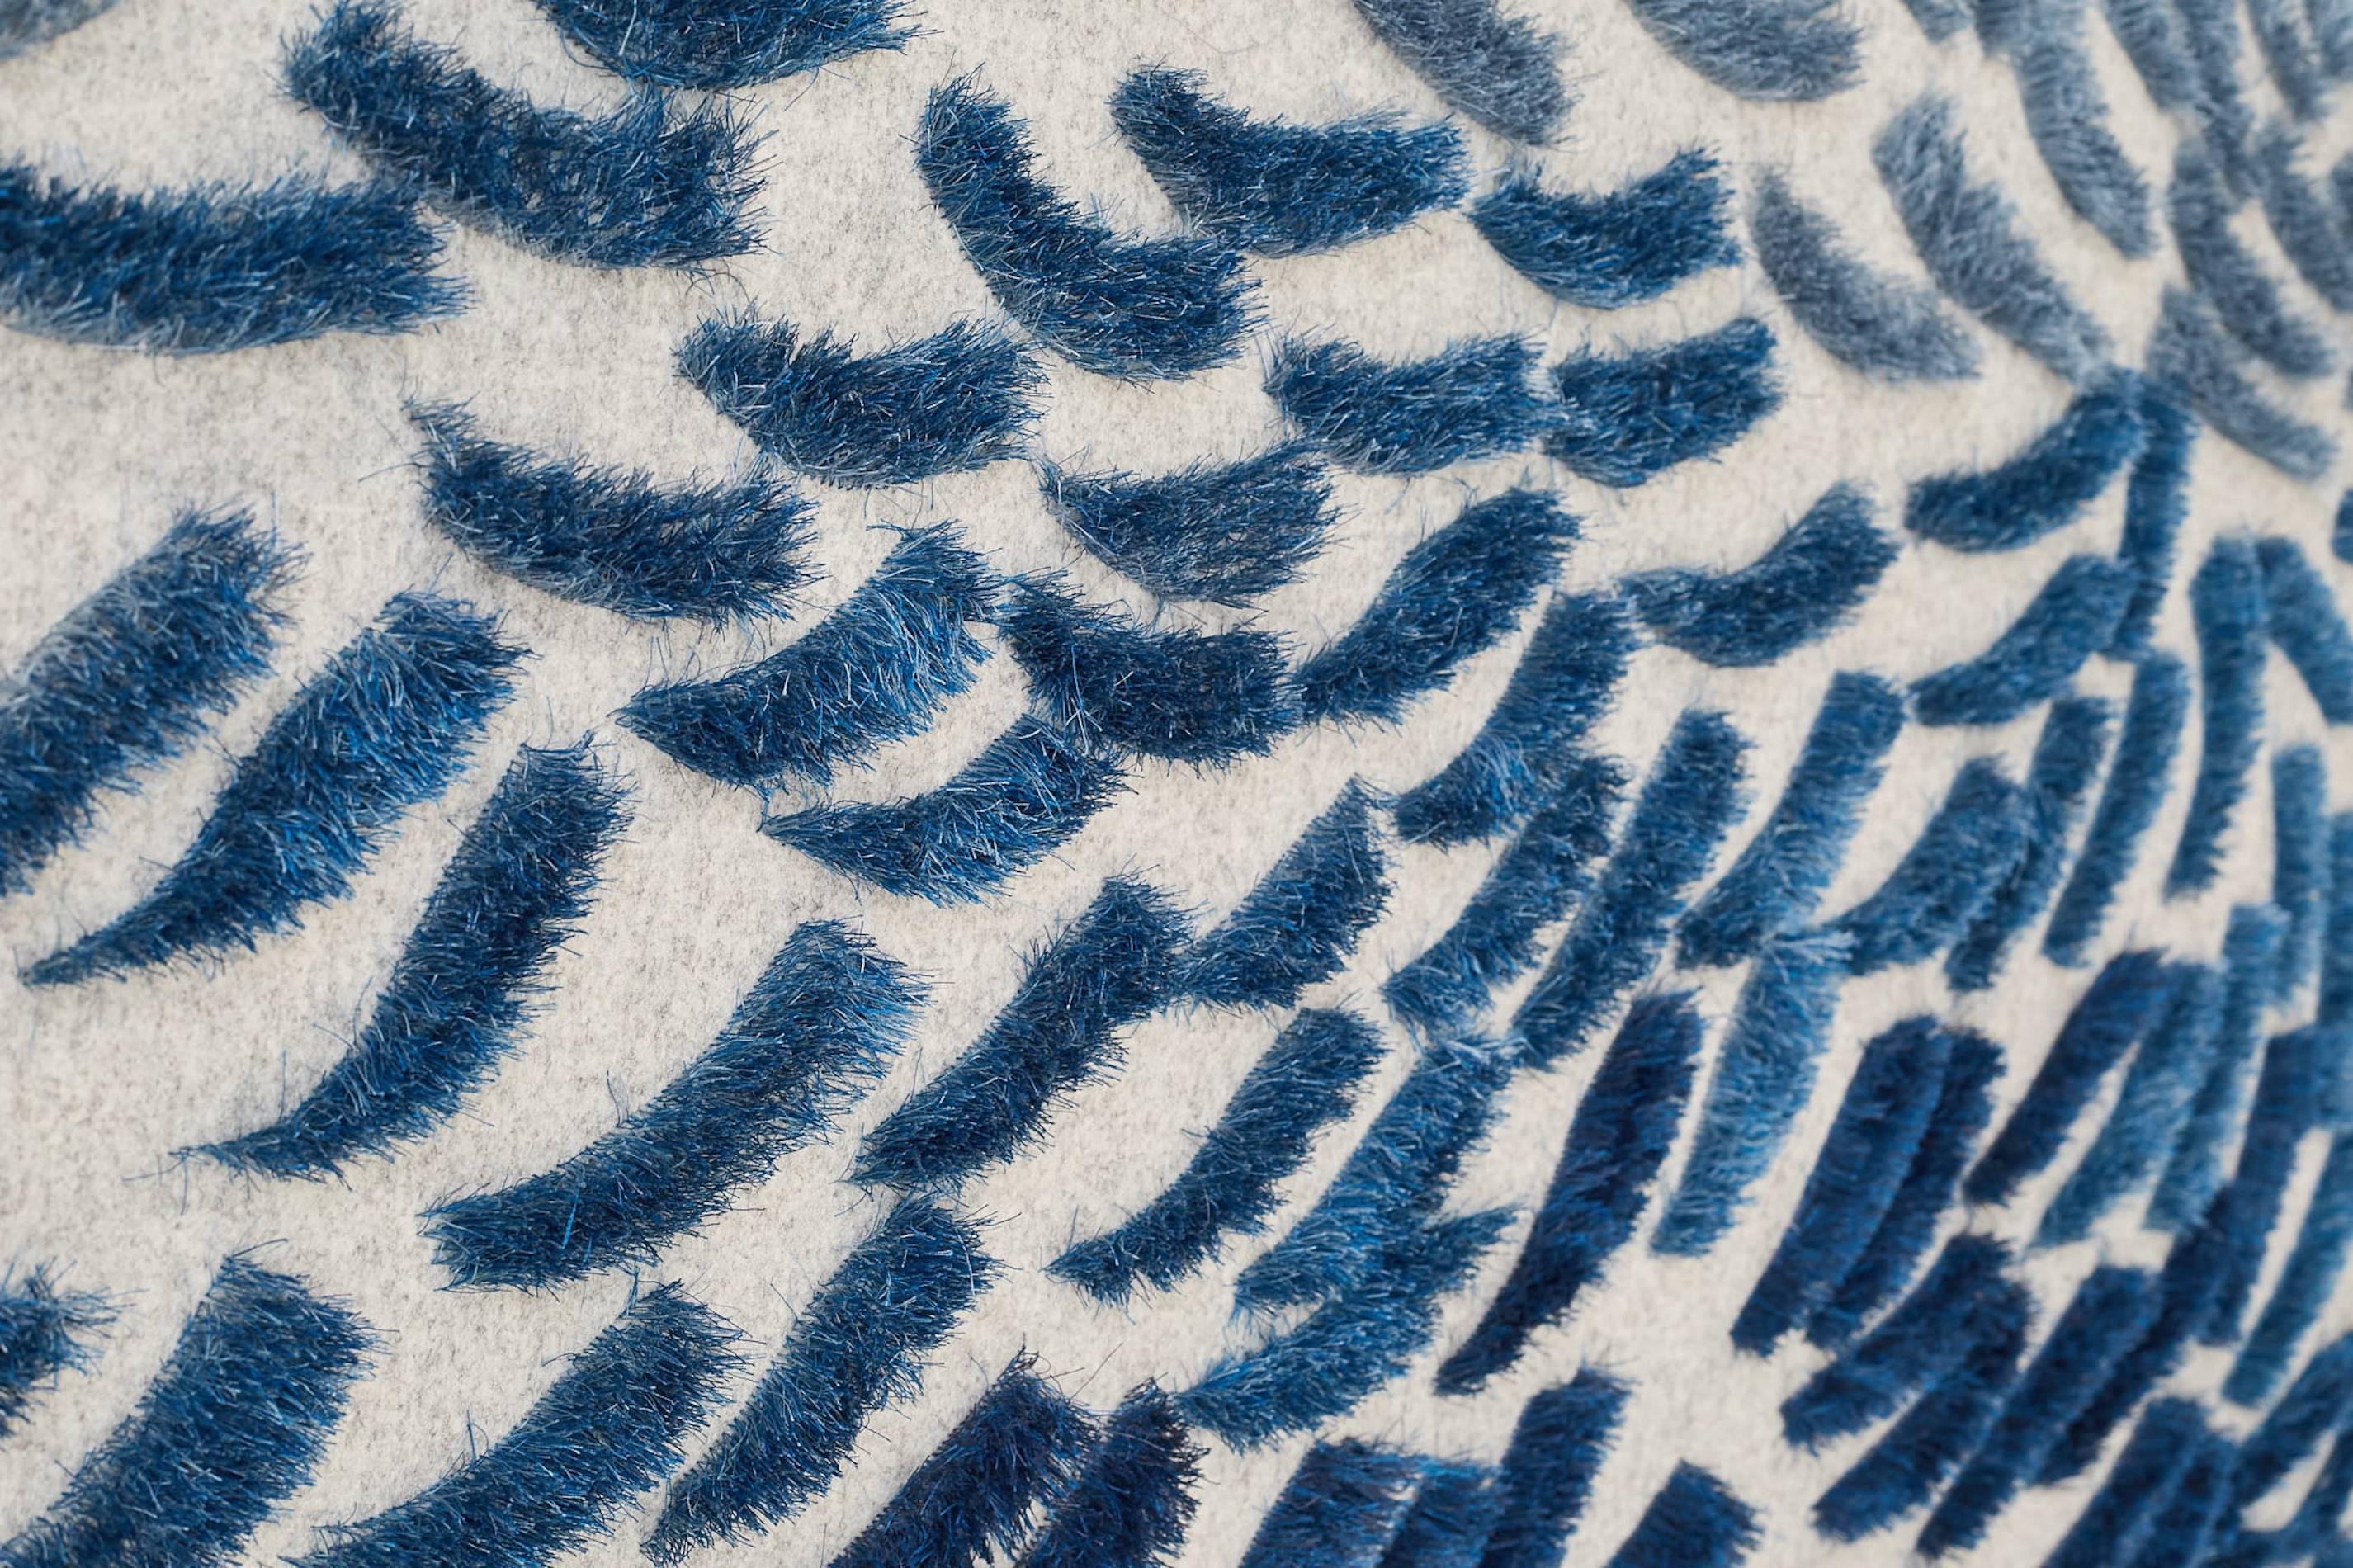 Great Britain (UK) Murmuration, a Large-Scale Textile Wall Hanging by Anna Gravelle